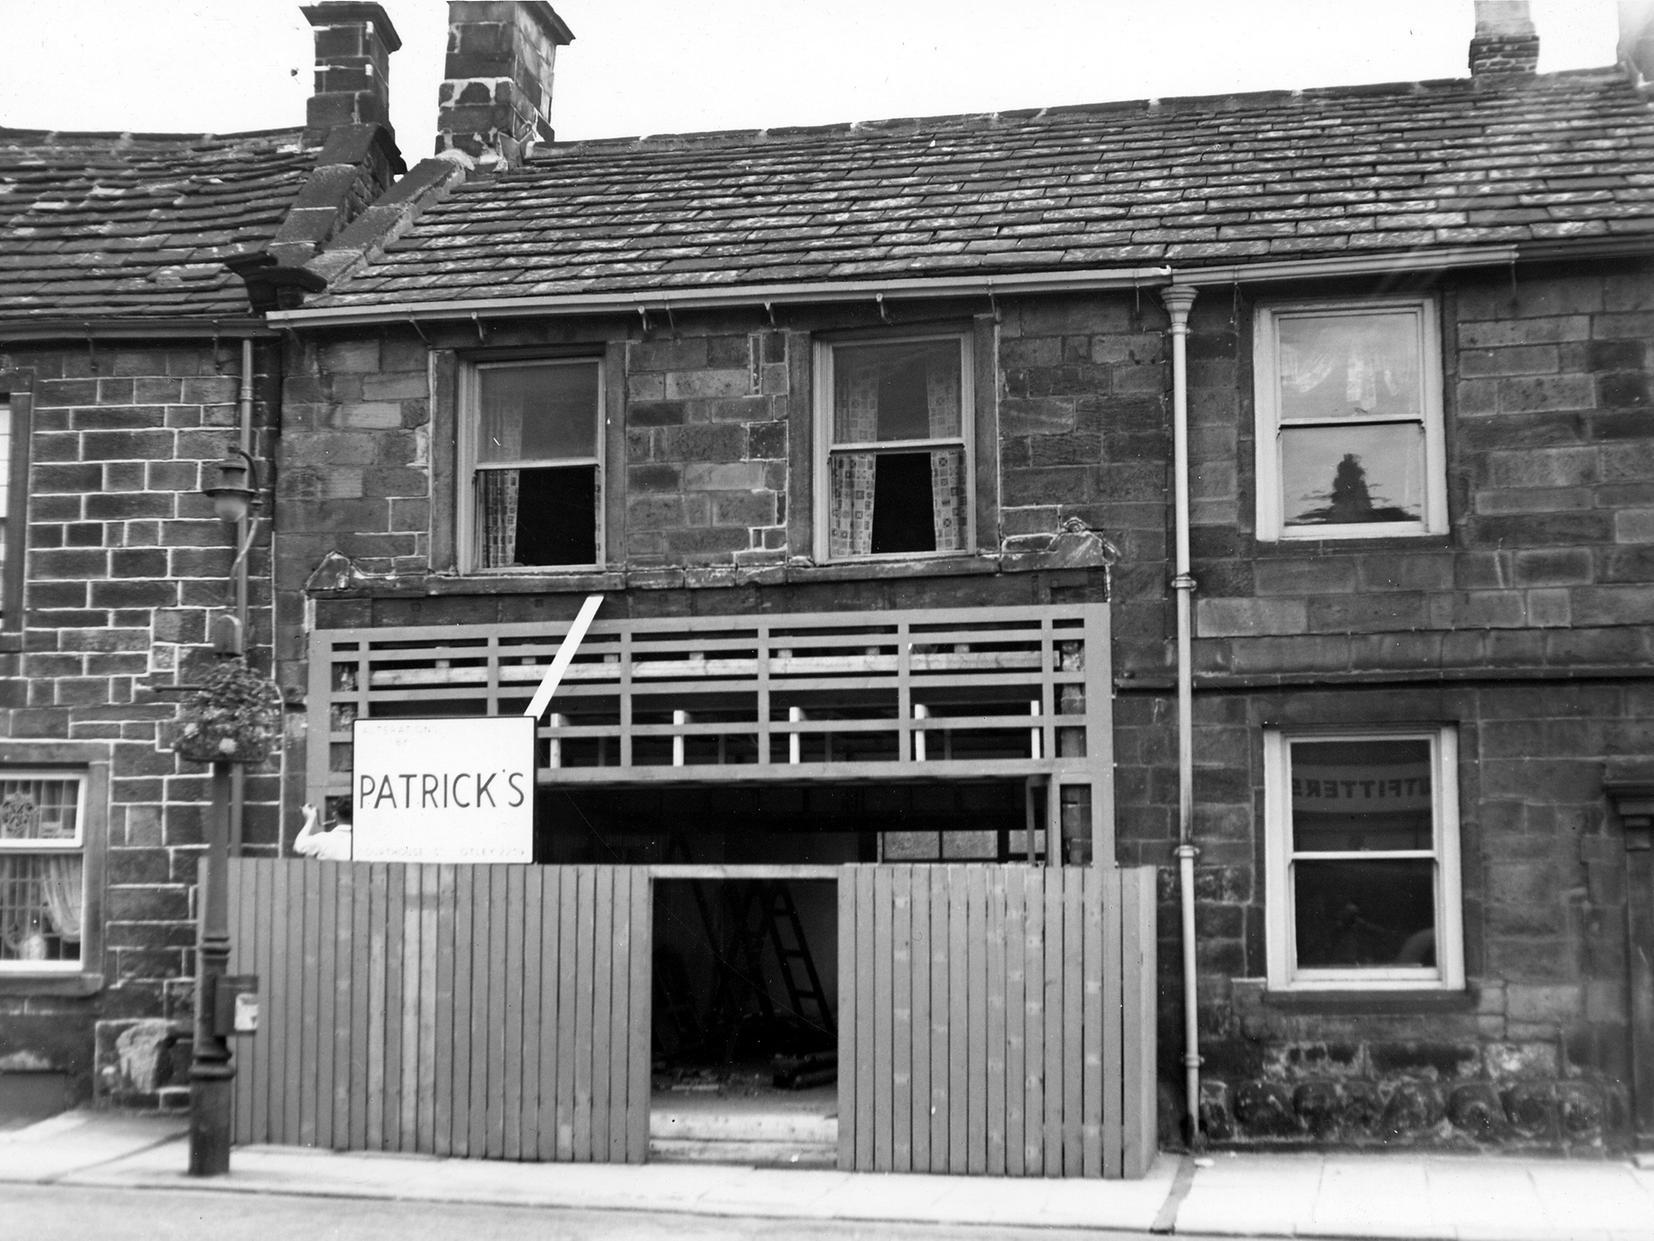 Number 4 Boroughgate in the process of being converted to Otley County Library. The library opened in 1959.